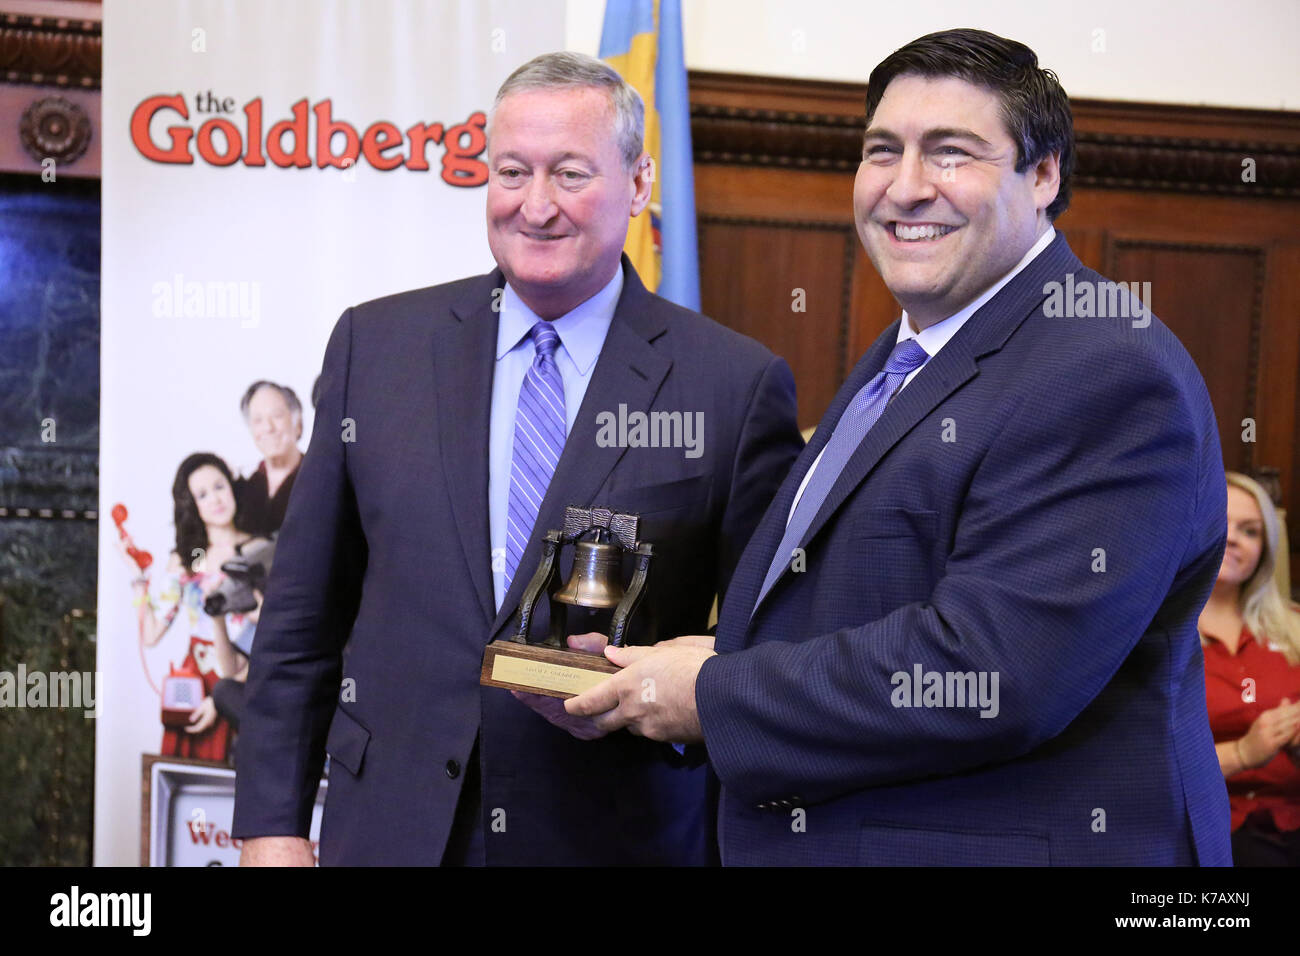 Pjiladelphia, PA, USA. 15th Sep, 2017. Producer Adam F Goldberg pictured with Philadelphia Mayor Jim Kenney as he receives a Liberty Bell for the Goldbergs in City Hall in Philadelphia, Pa on September 15, 2017 Credit: Star Shooter/Media Punch/Alamy Live News Stock Photo